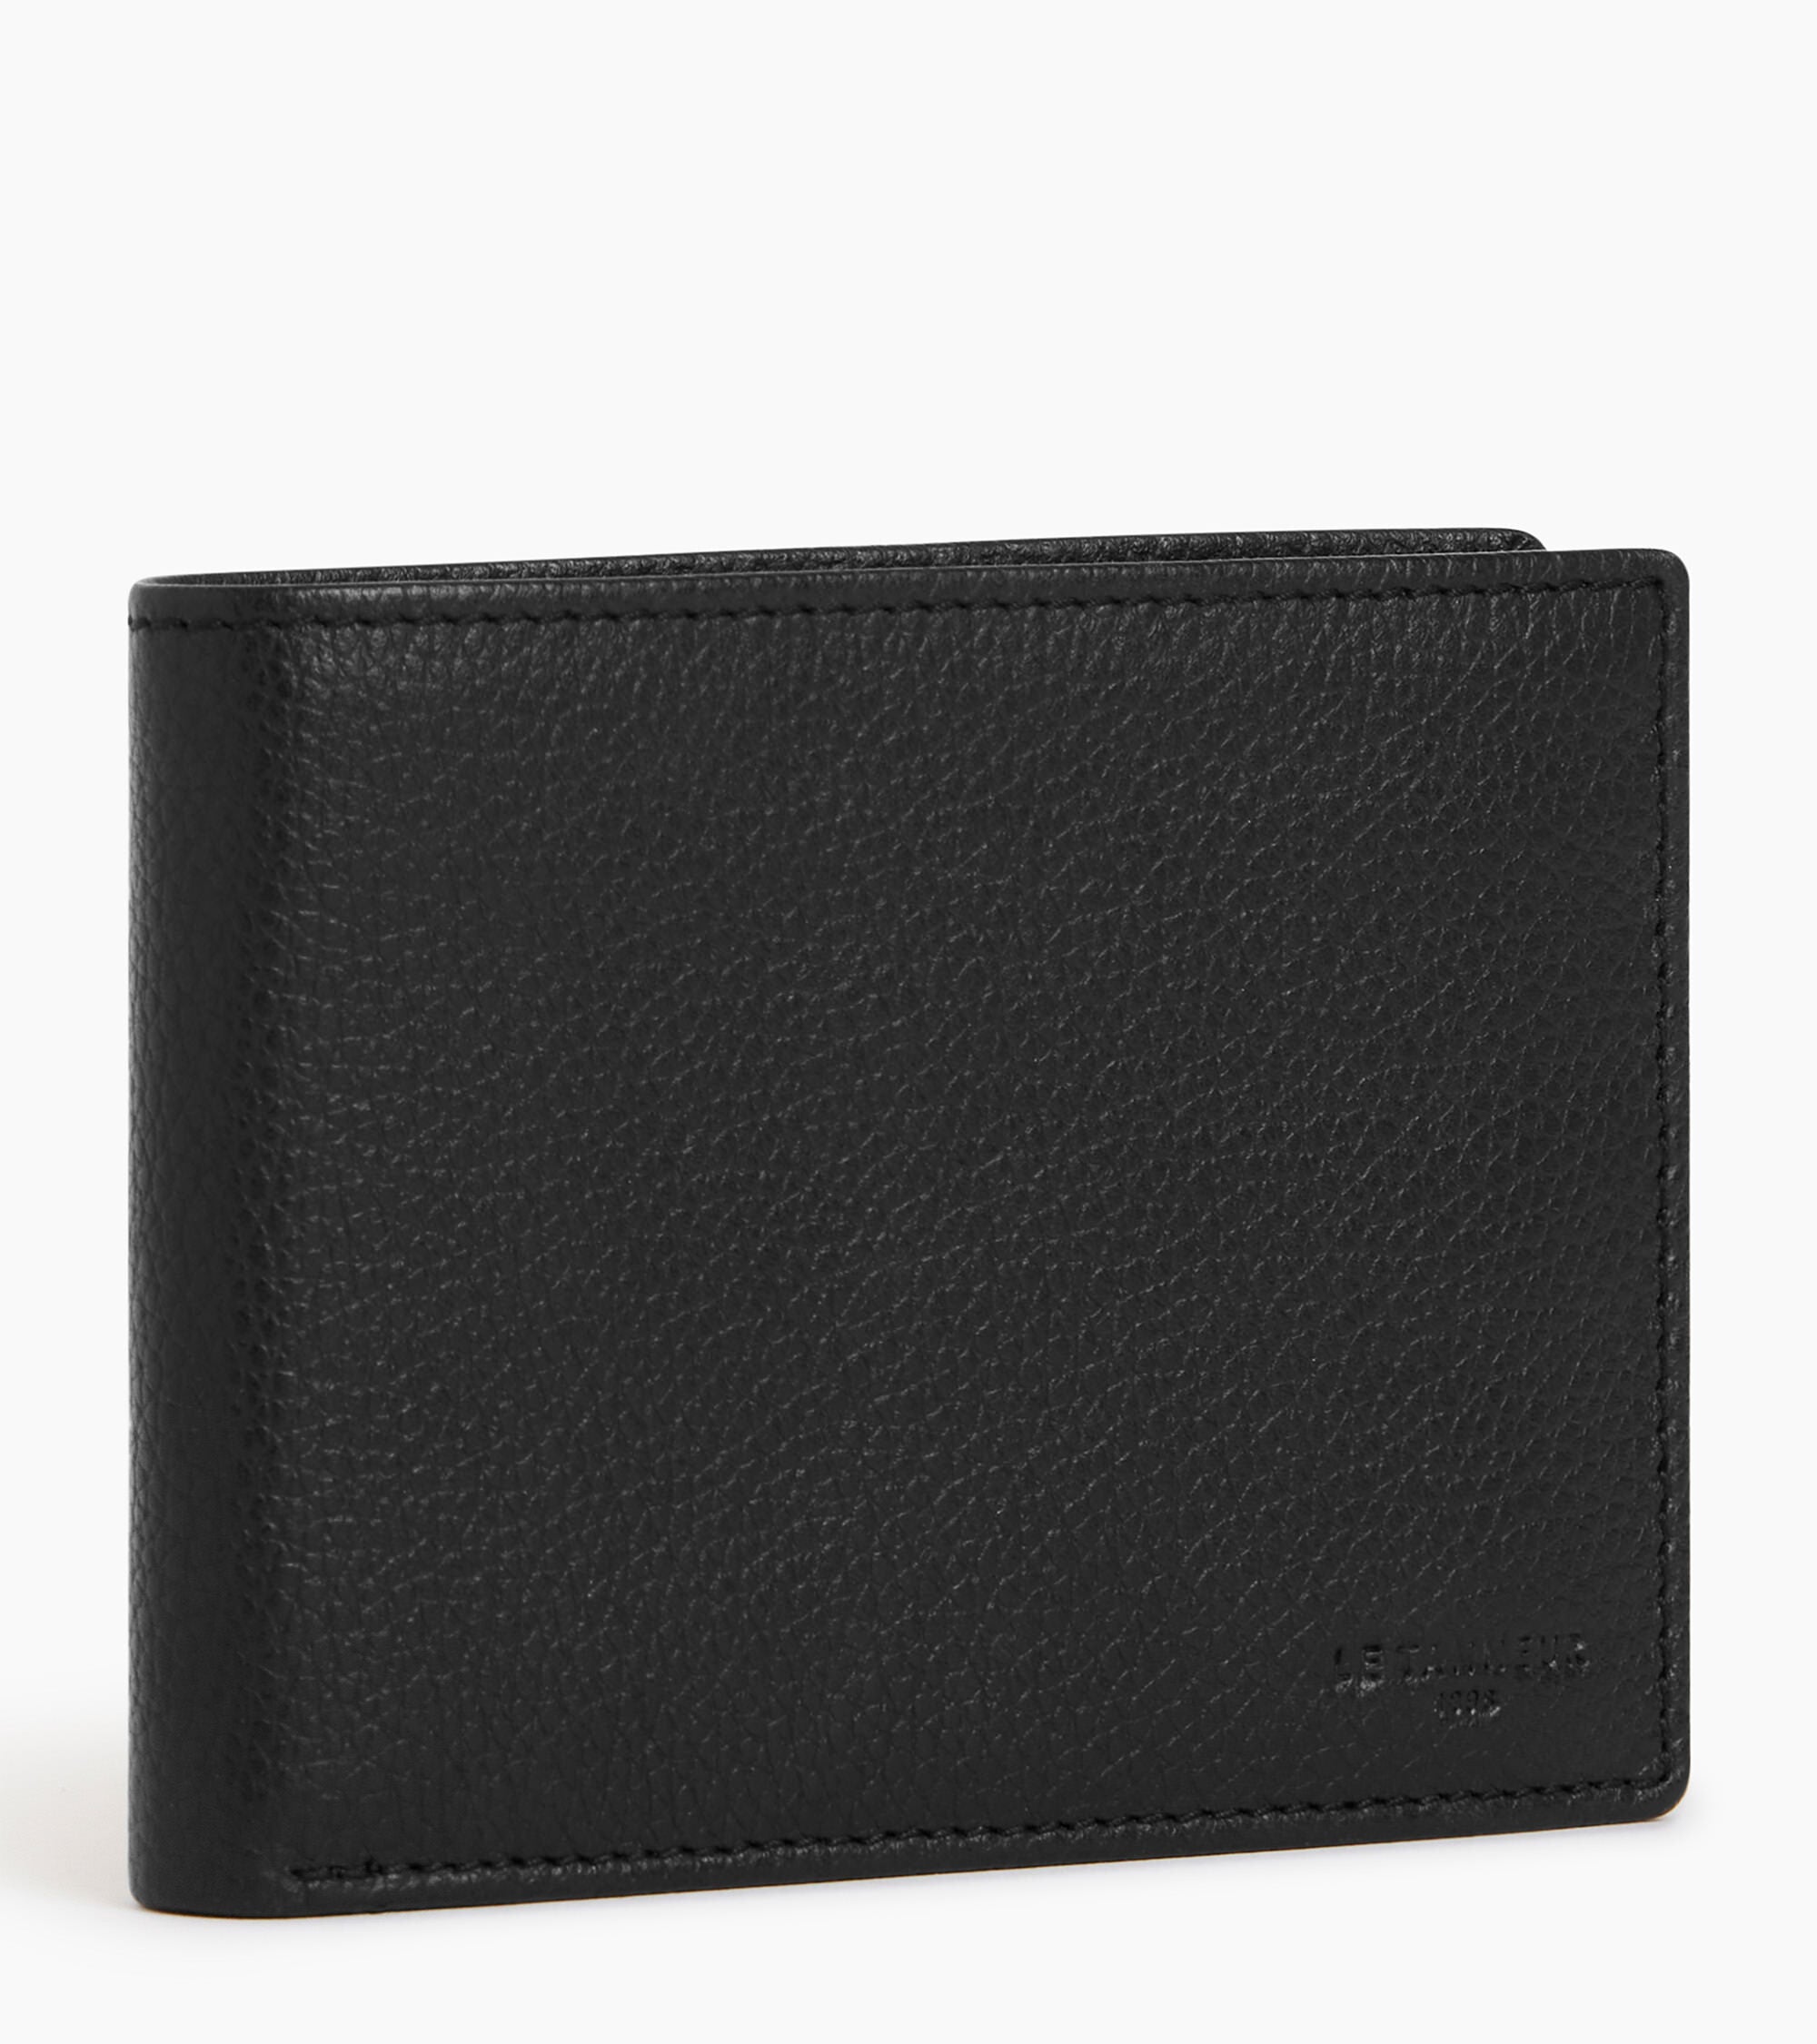 Charles horizontal, zipped wallet with 2 gussets in grained leather